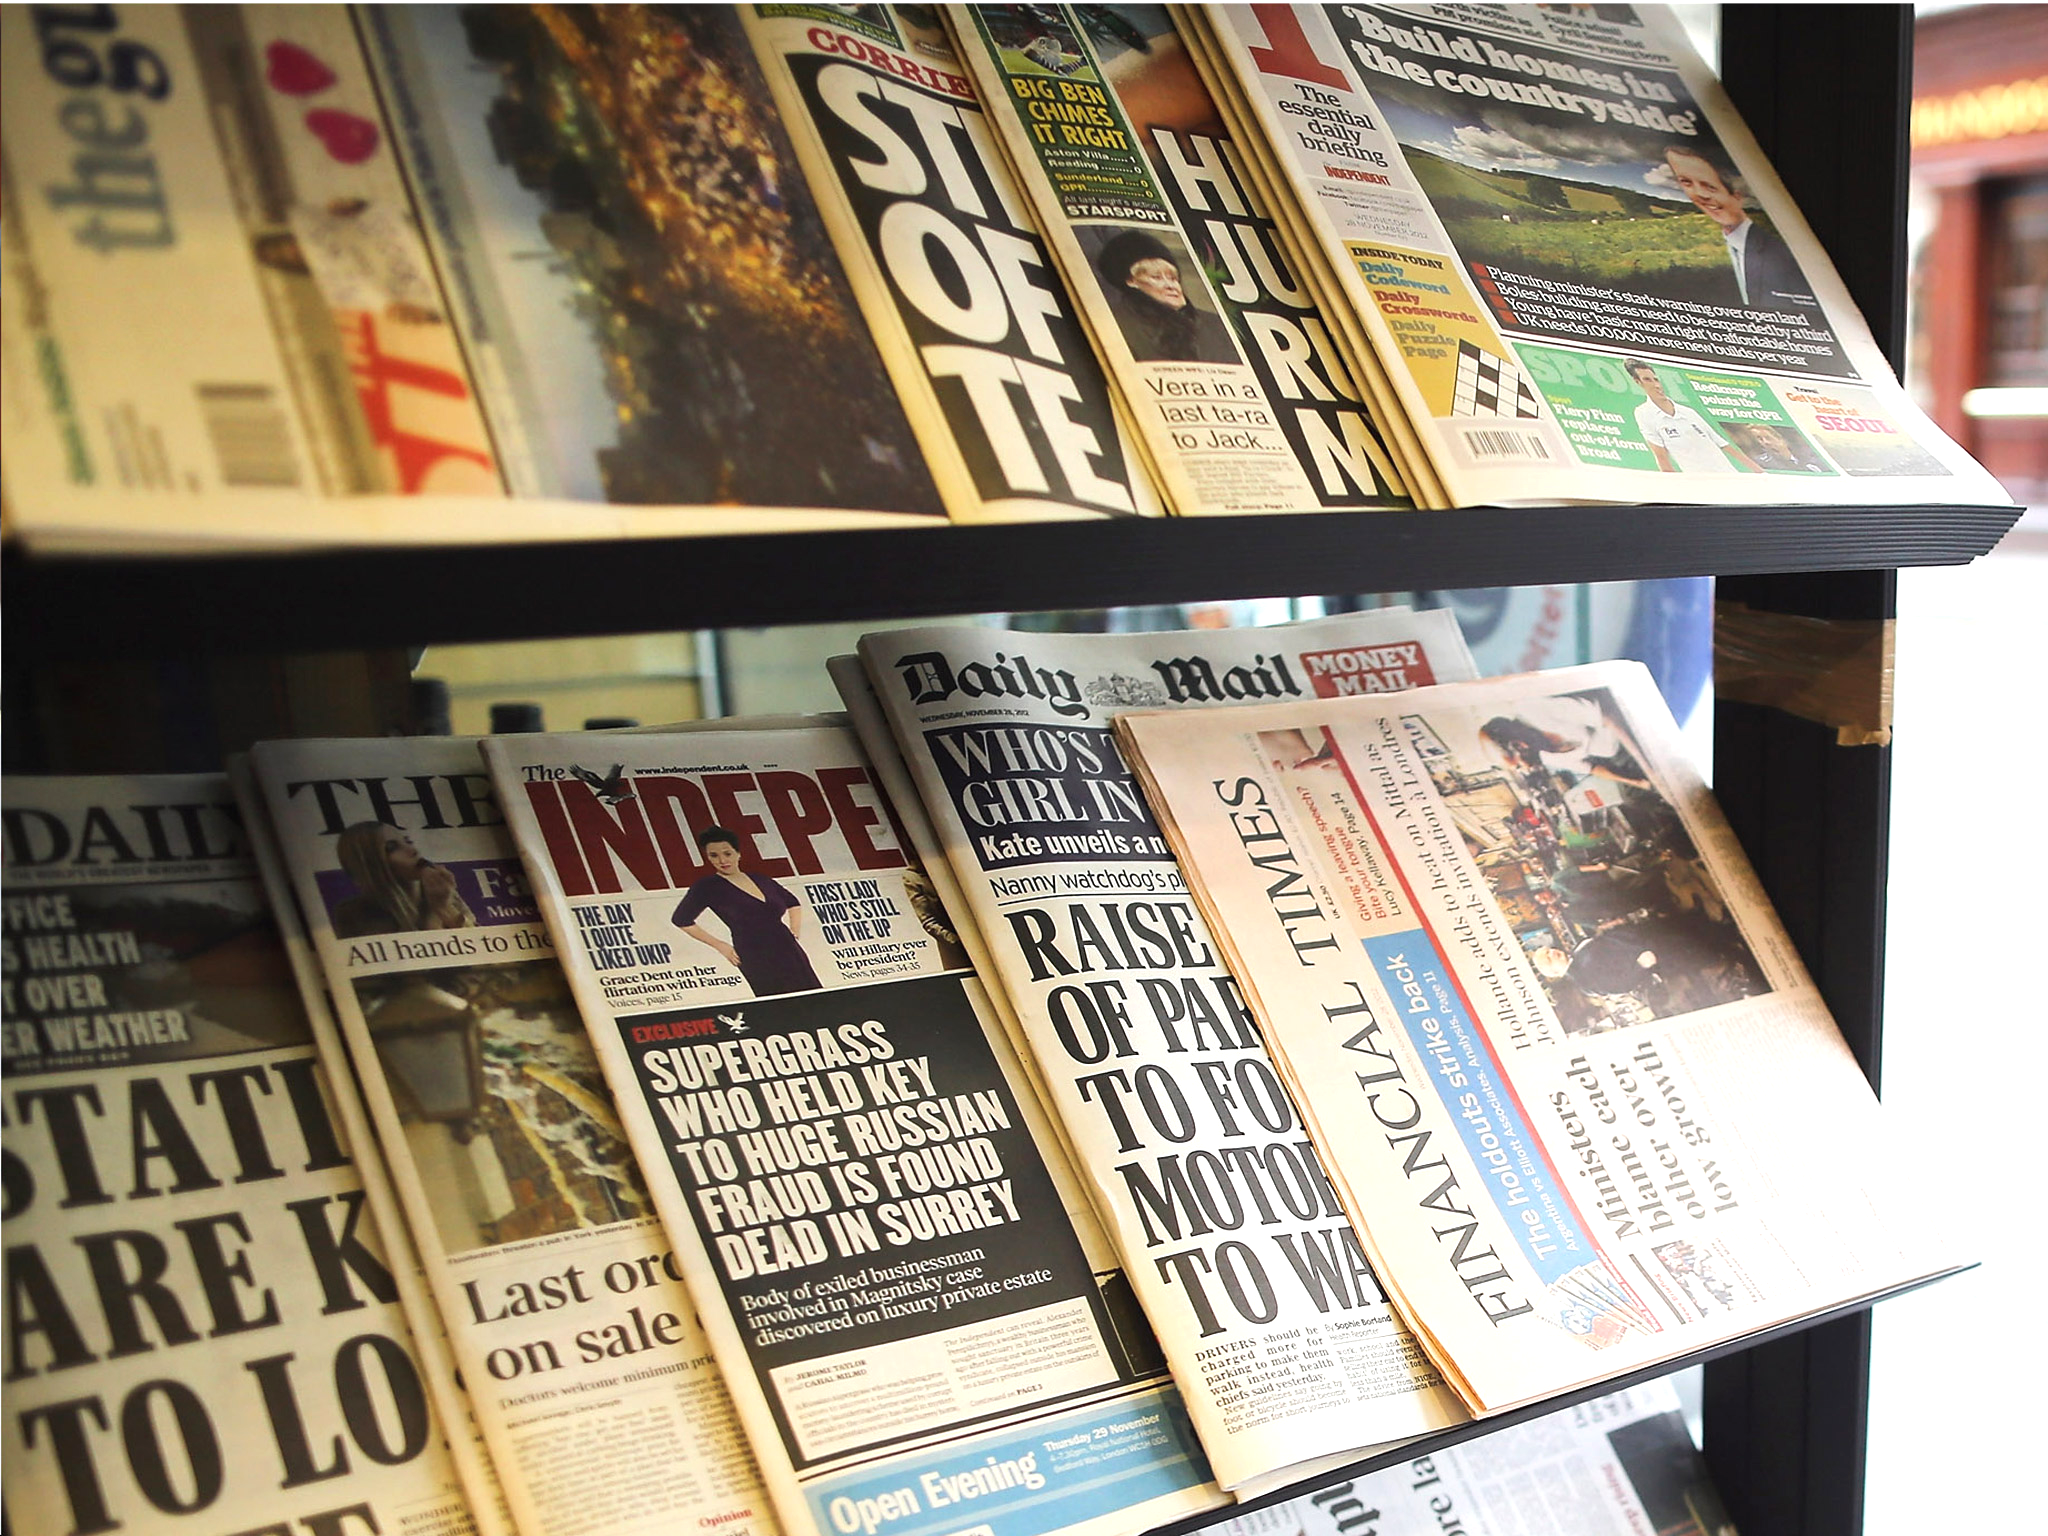 David Cameron has now warned Britain's newspapers that they should sign up urgently to the Royal Charter